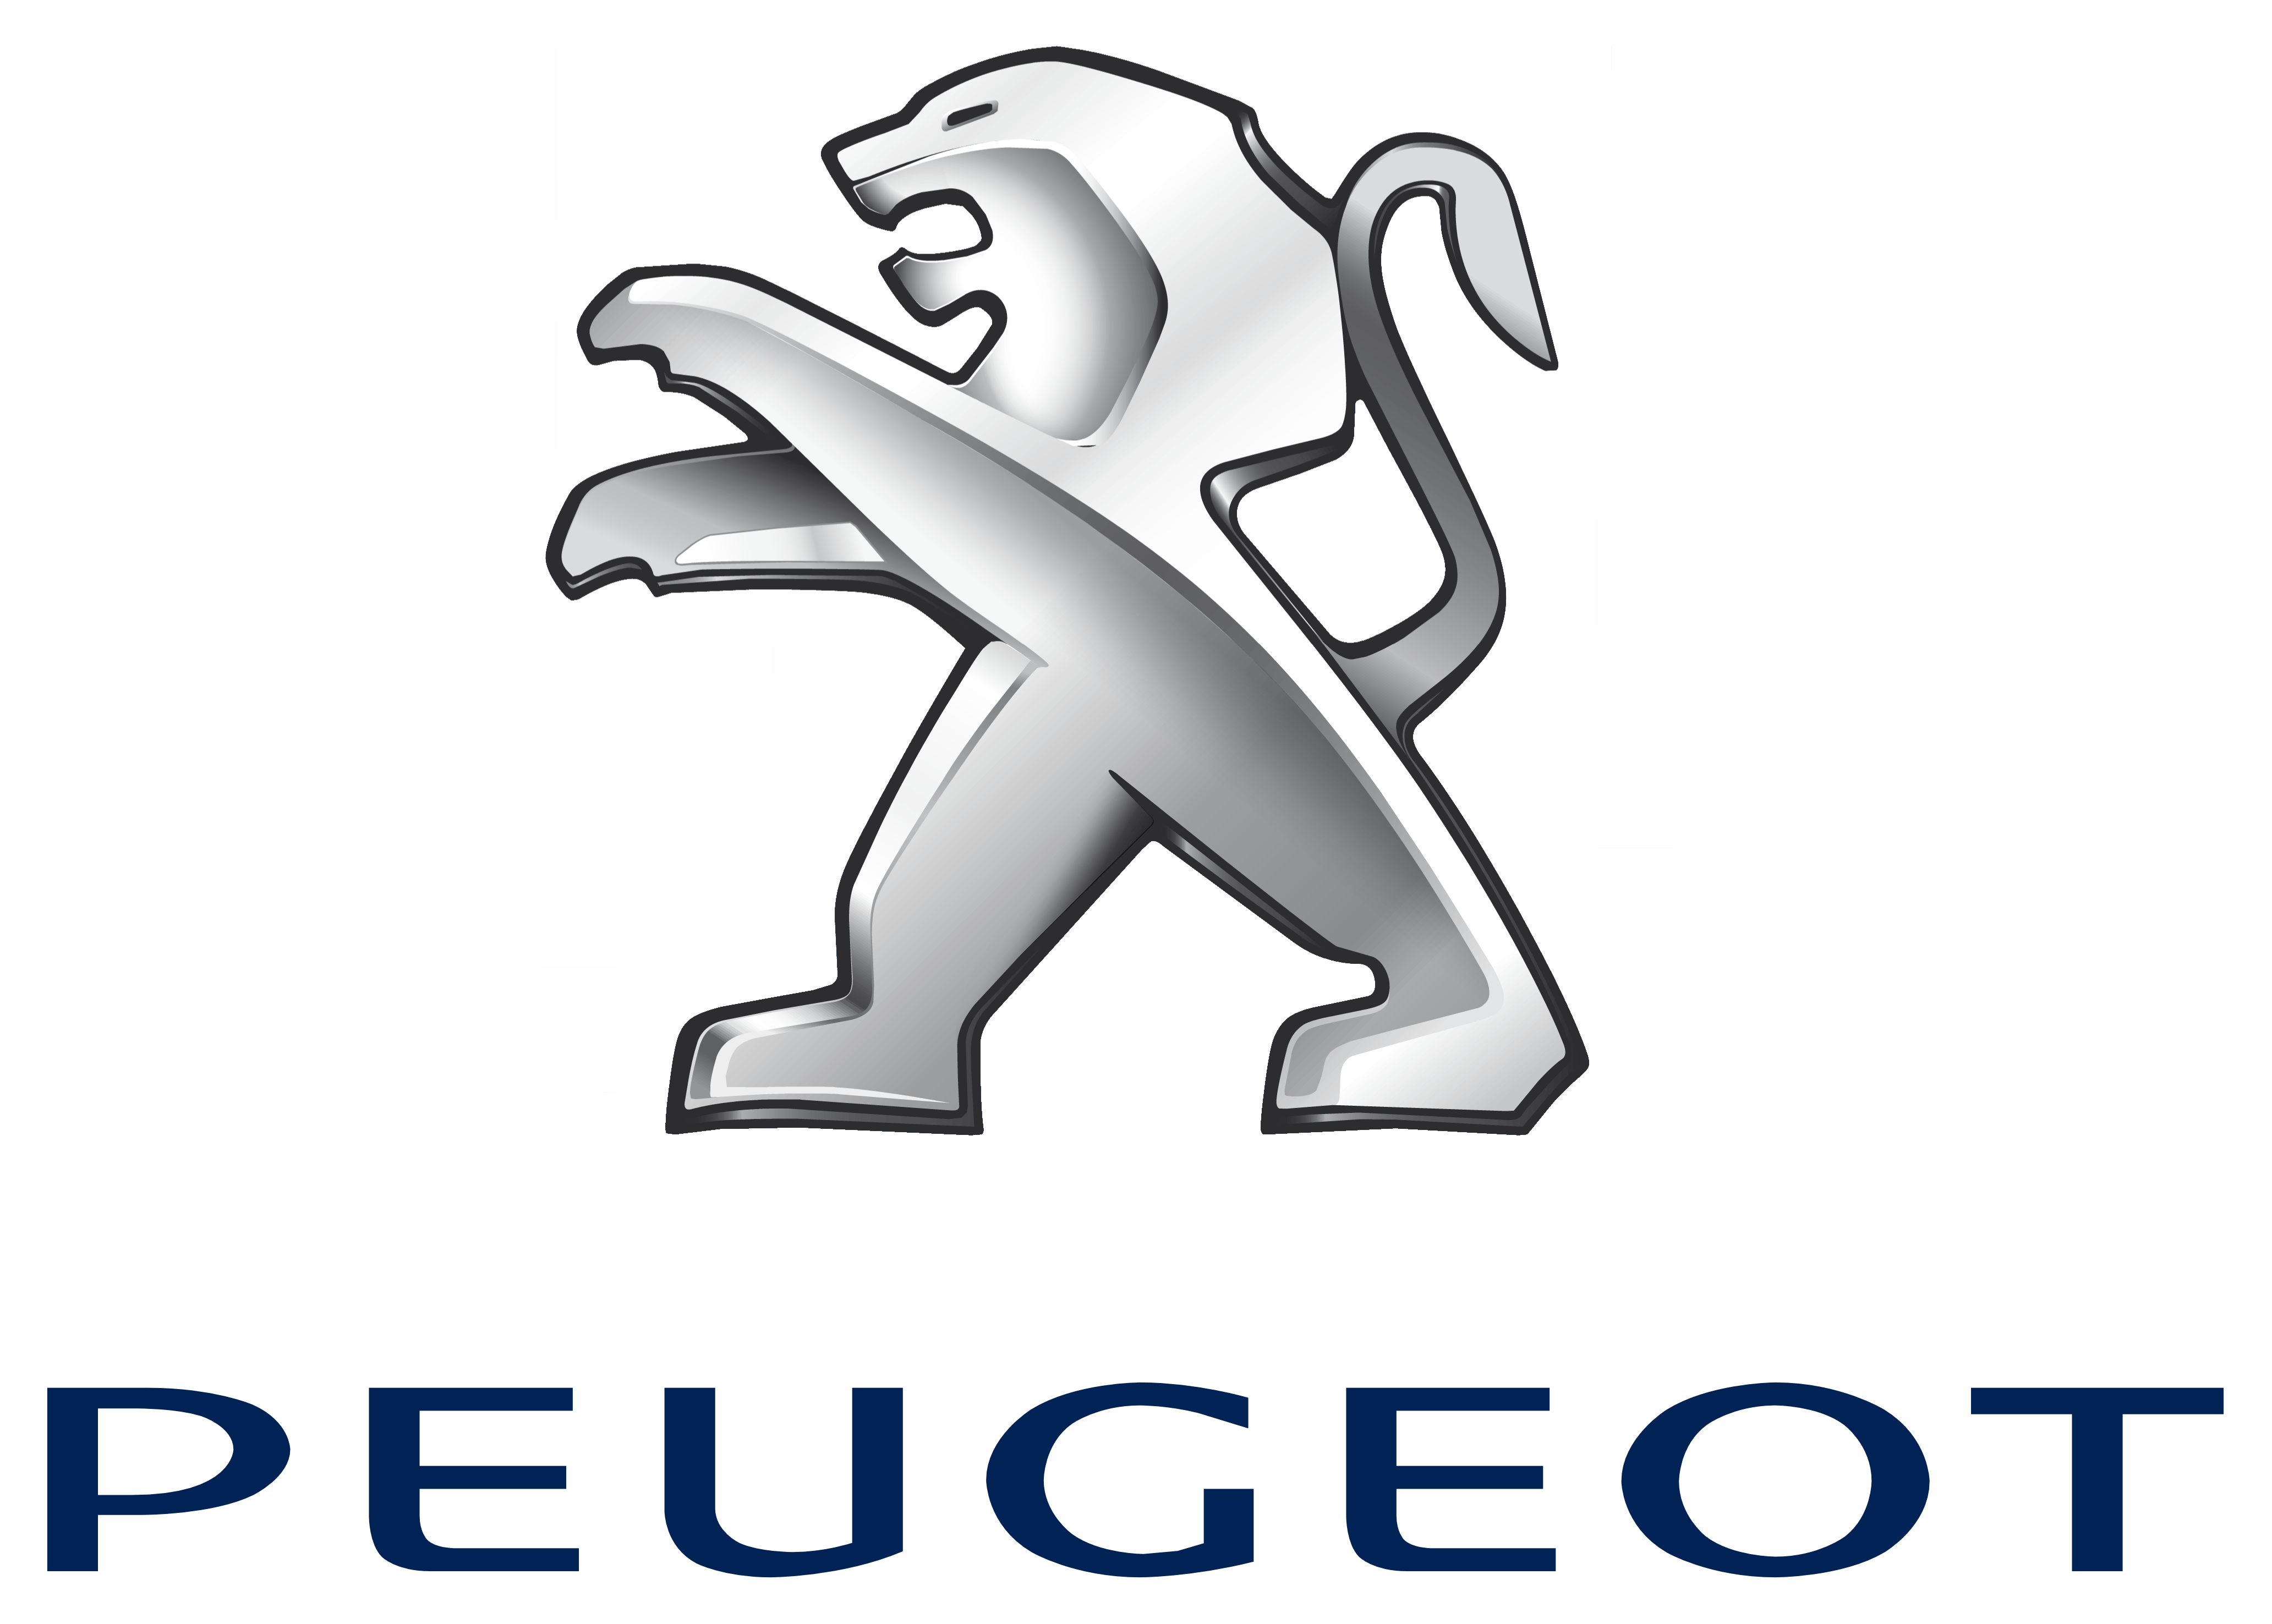 Car Company with Lion Logo - Peugeot Logo, Peugeot Car Symbol Meaning and History | Car Brand ...